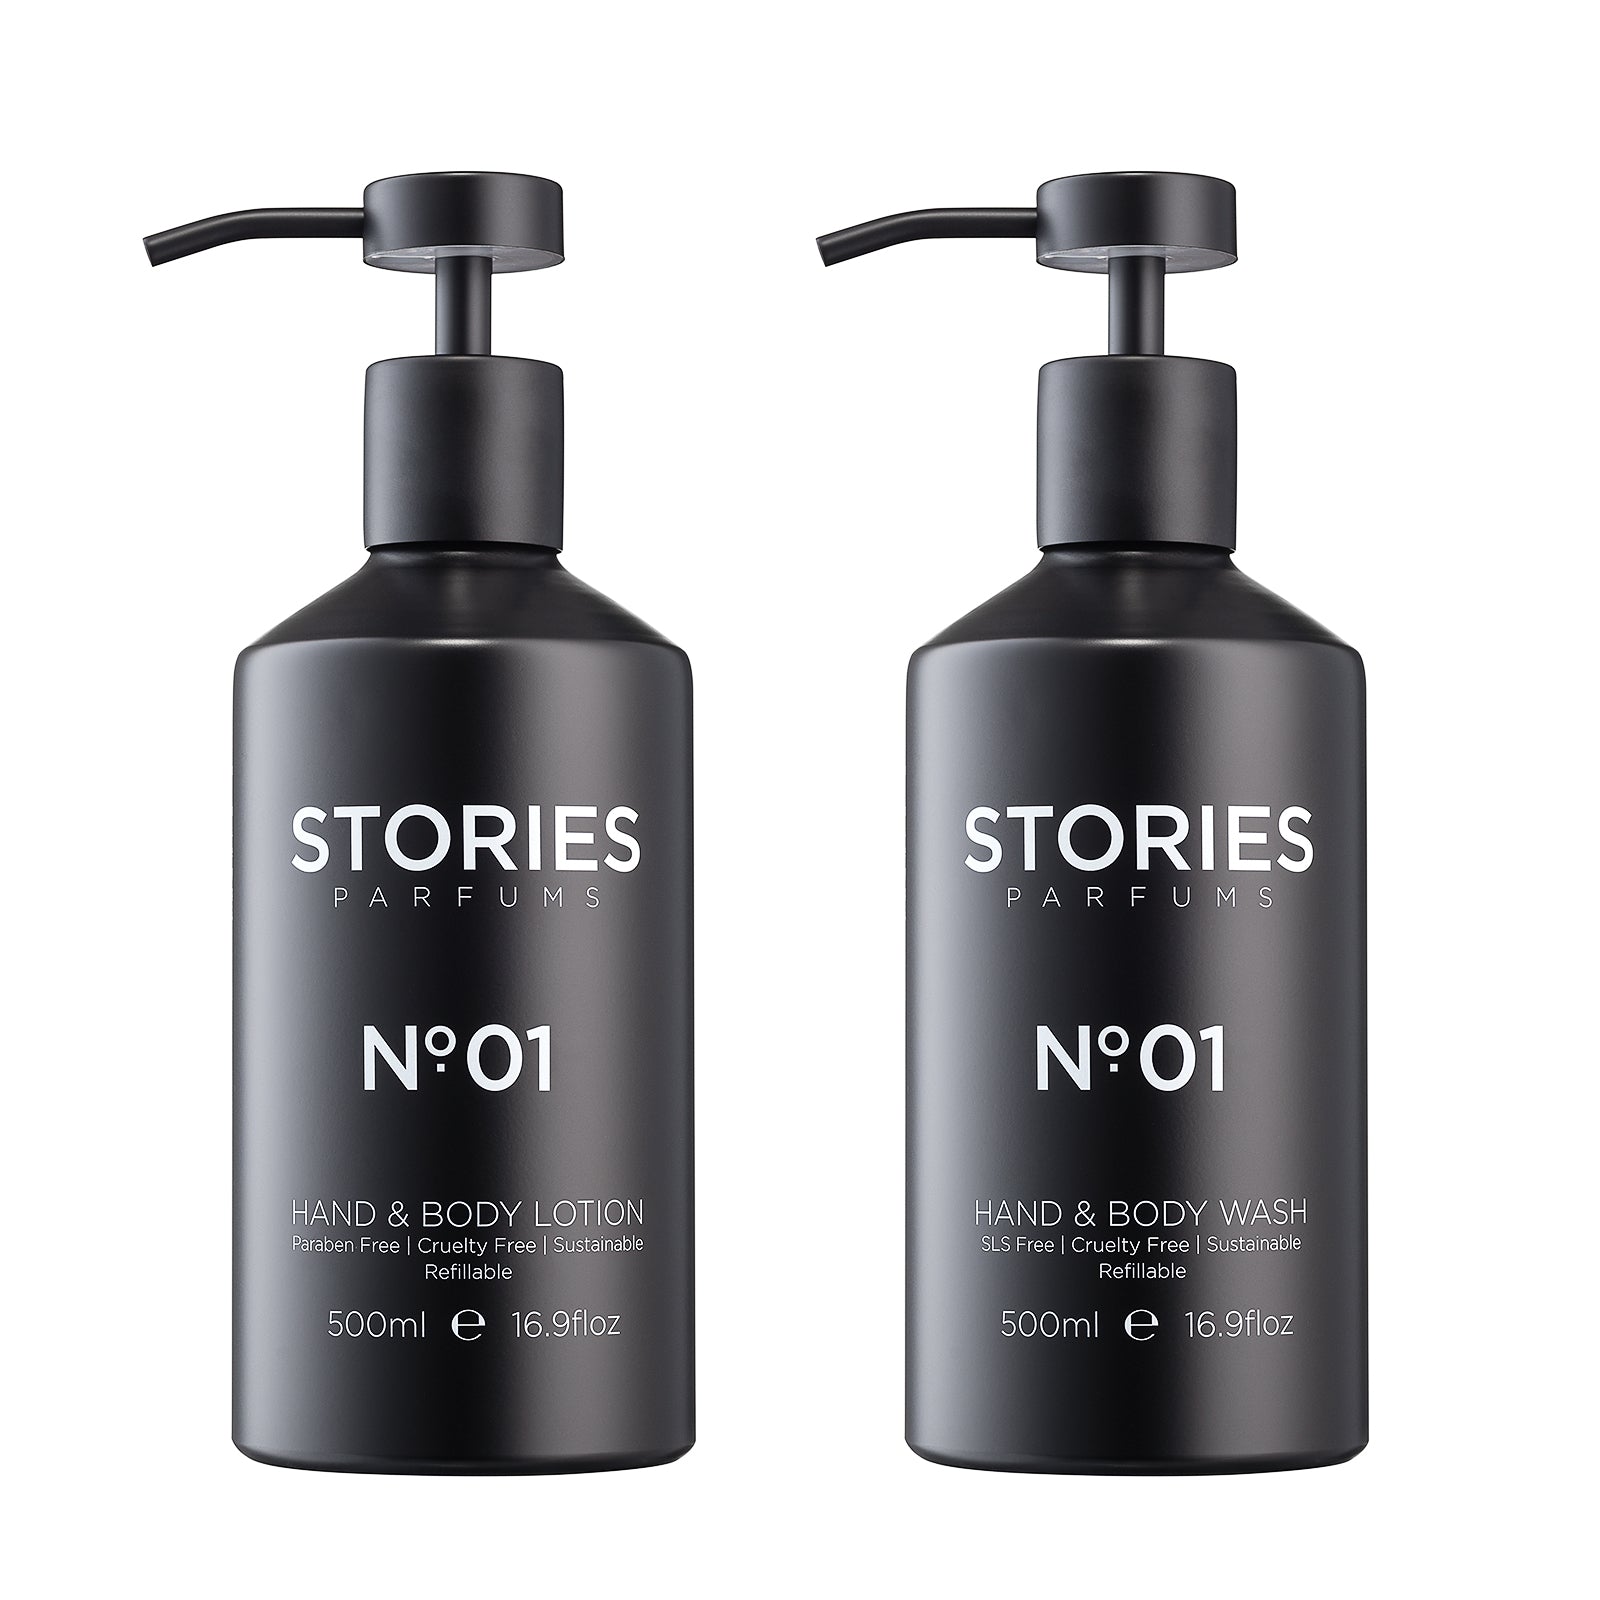 STORIES Parfums is a collection of Hand & Body products designed to complement our fragrances and embellish your scented story. Full of nourishing ingredients and gentle on skin, the Hand & Body Washes and Lotions are infused with a delicate veil of fragrance, allowing you to layer and lock the notes as you wish. • Paraben and SLS Free • Cruelty Free